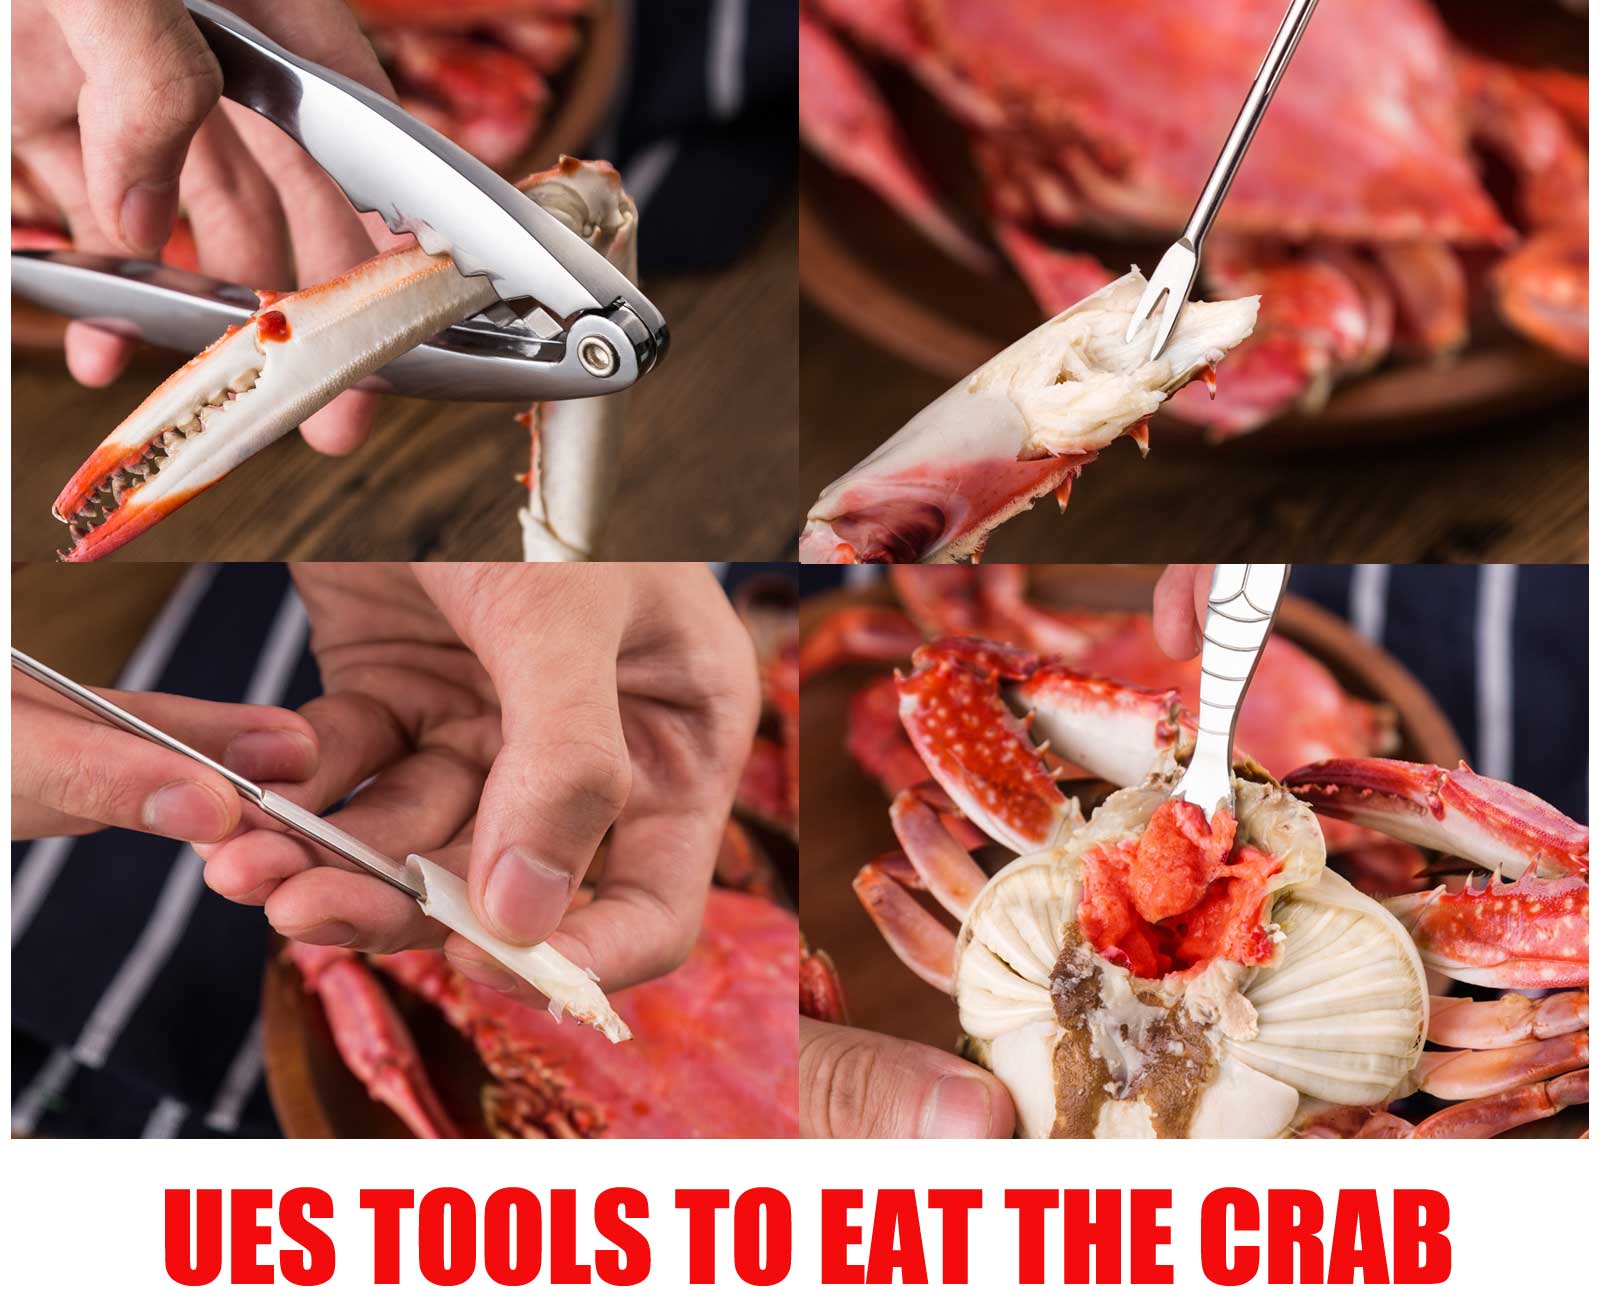 Ues the tools to eat Crab